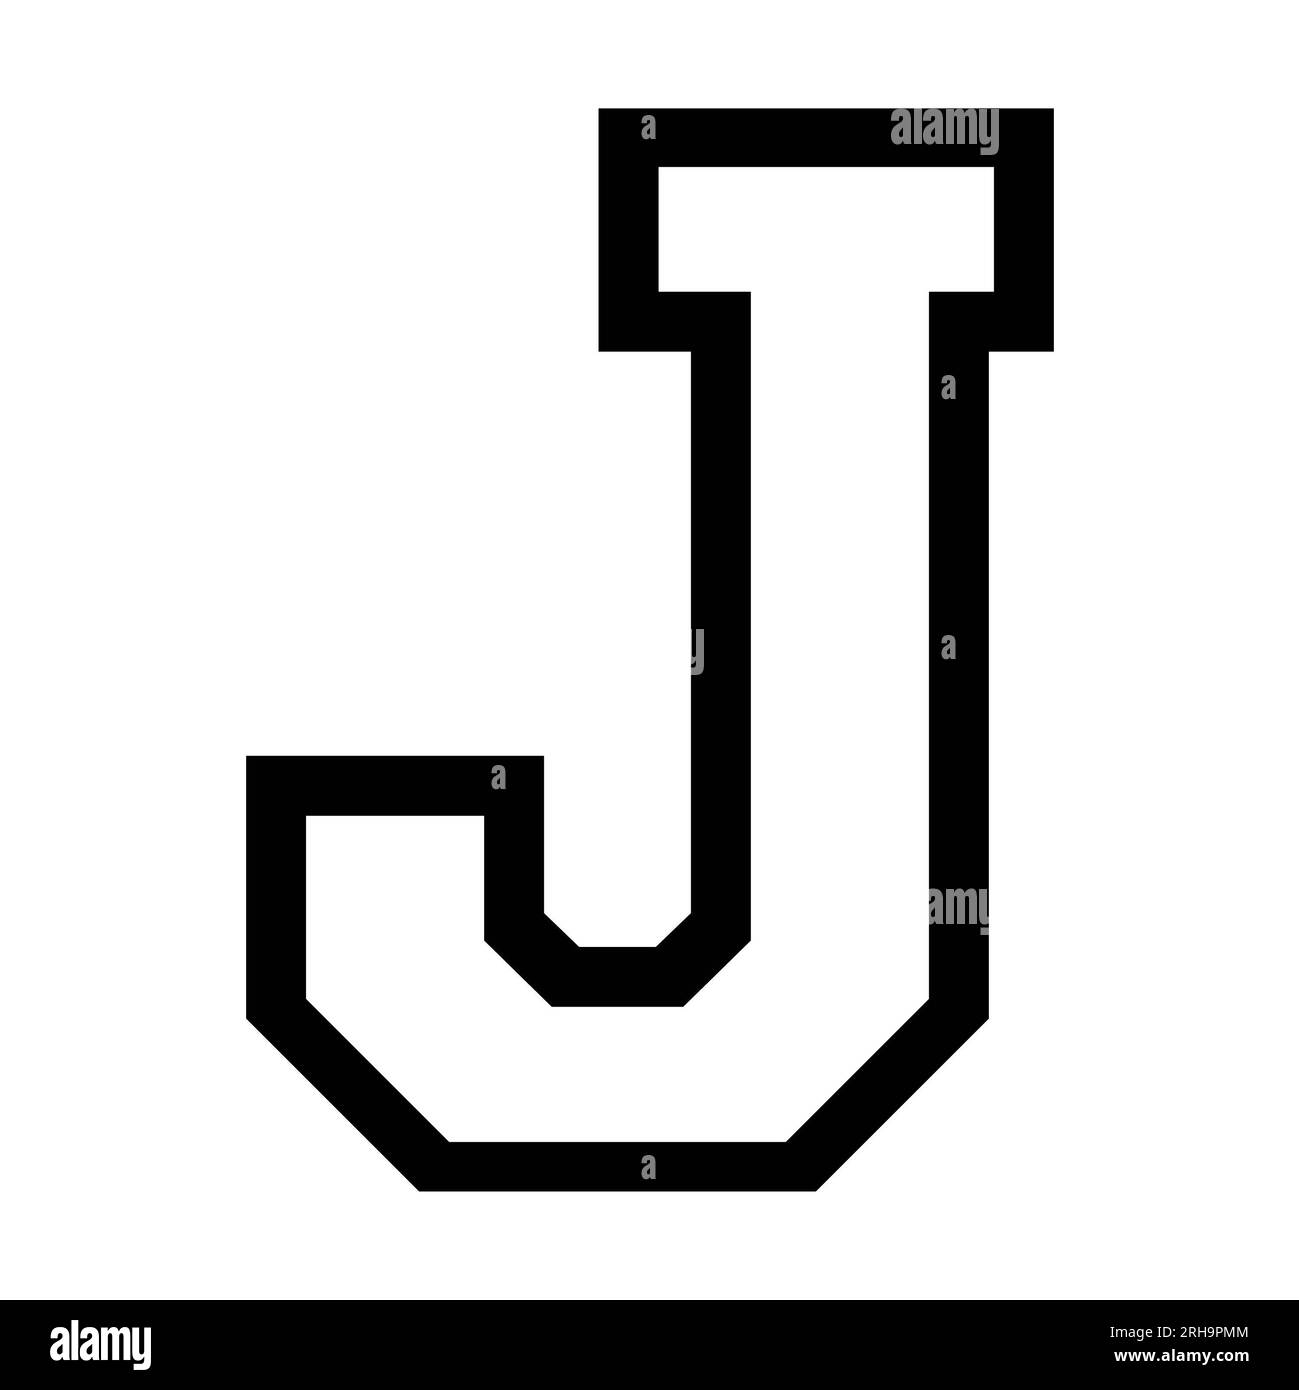 J letter sports college jersey font on white background. Isolated illustration. Stock Photo